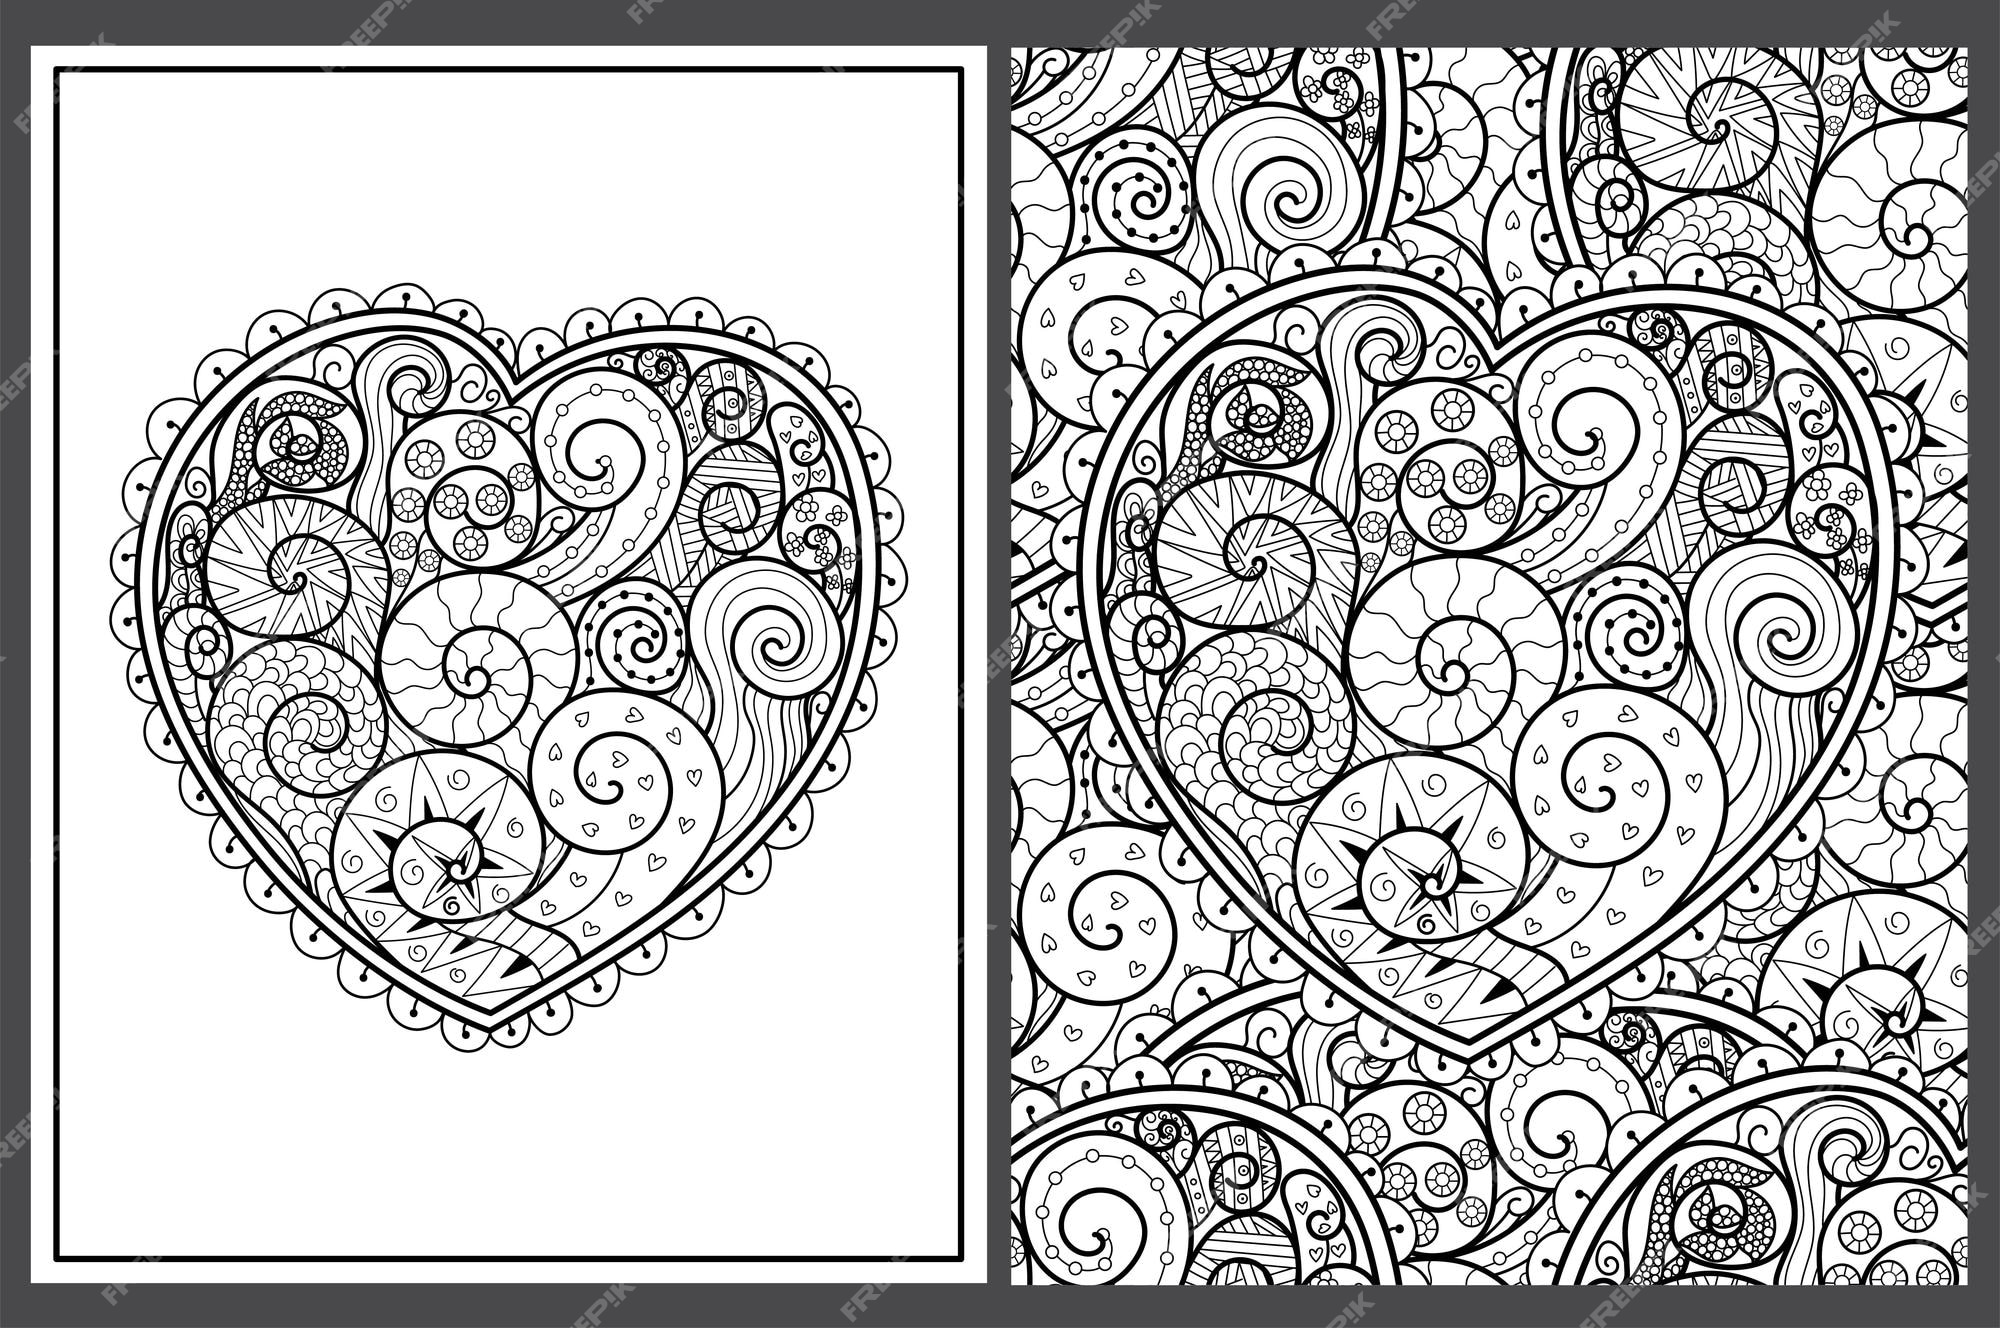 Premium vector hand drawn doodle heart coloring pages set in us letter format black and white valentines day